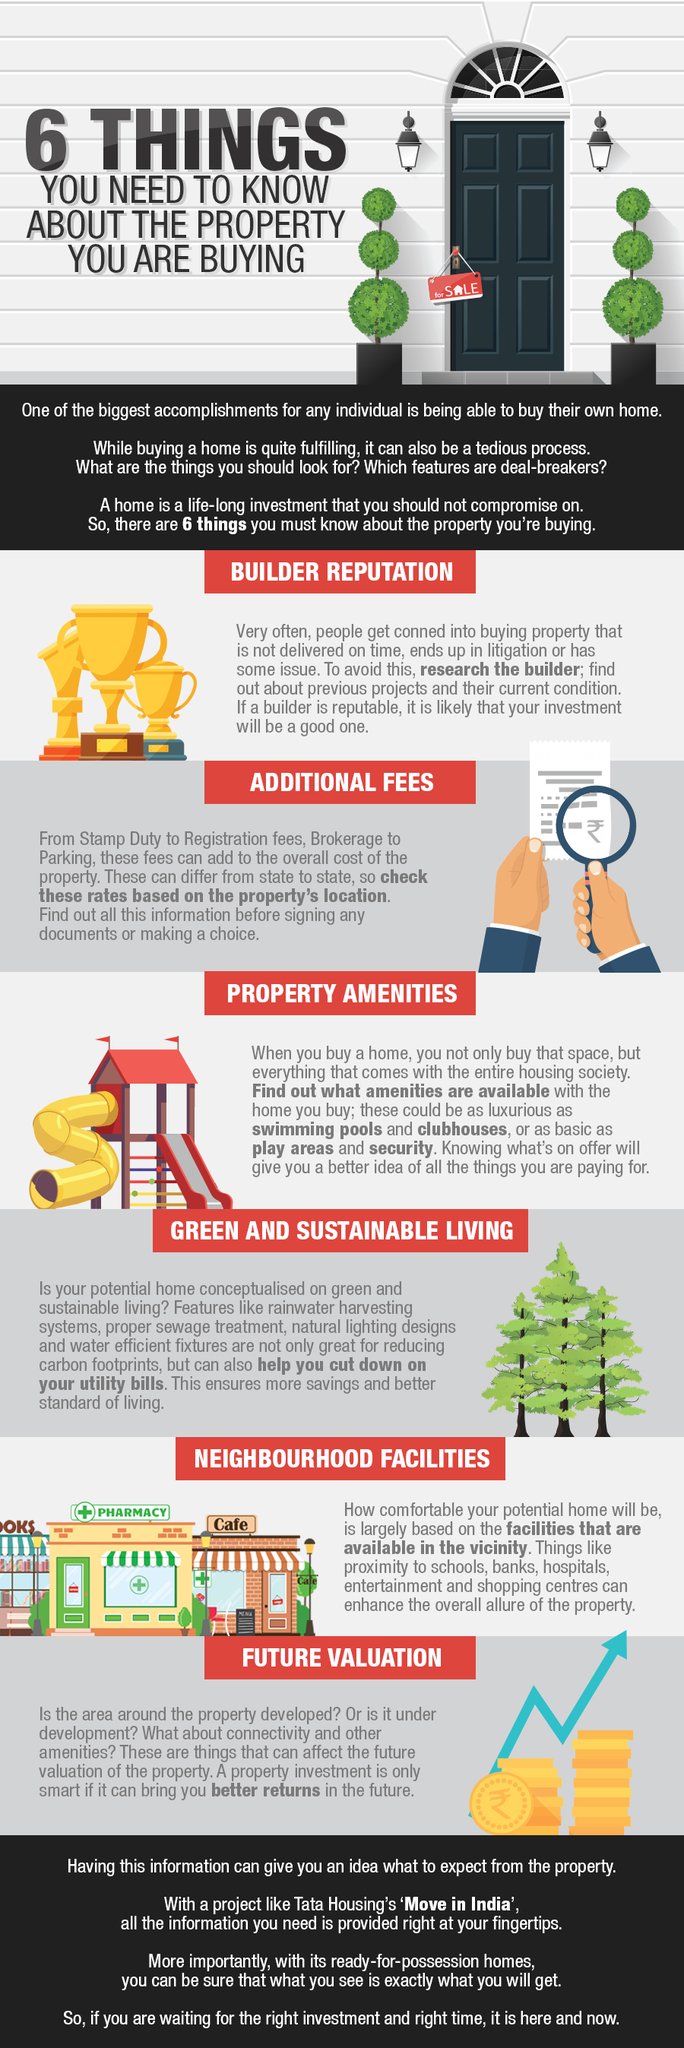 6 Things You Need To Know About The Property You Are Buying